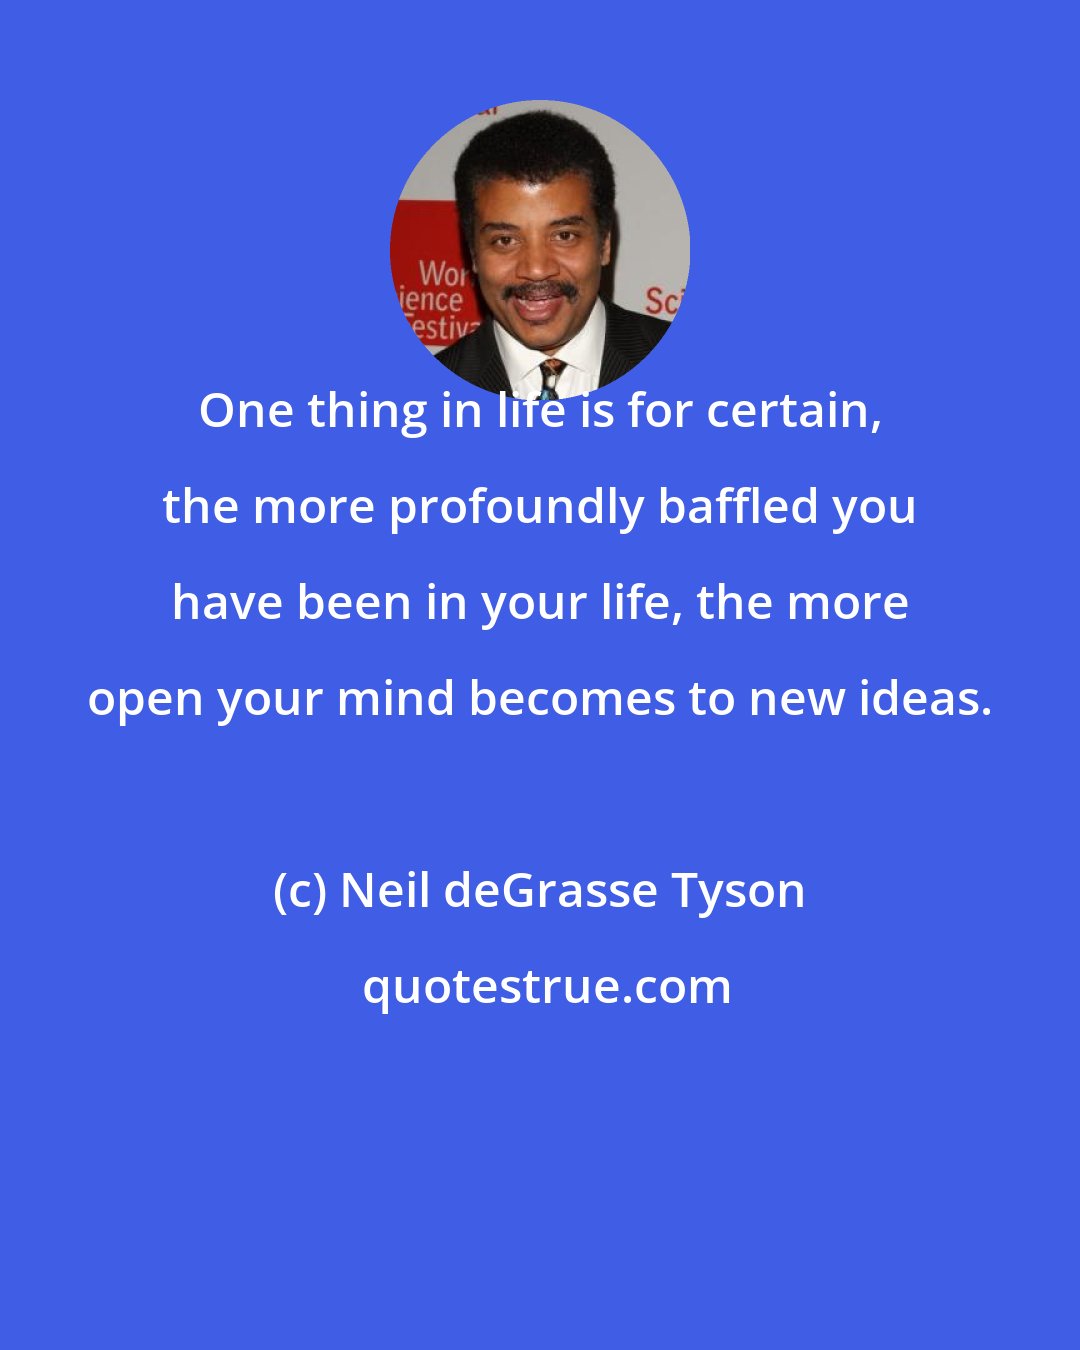 Neil deGrasse Tyson: One thing in life is for certain, the more profoundly baffled you have been in your life, the more open your mind becomes to new ideas.